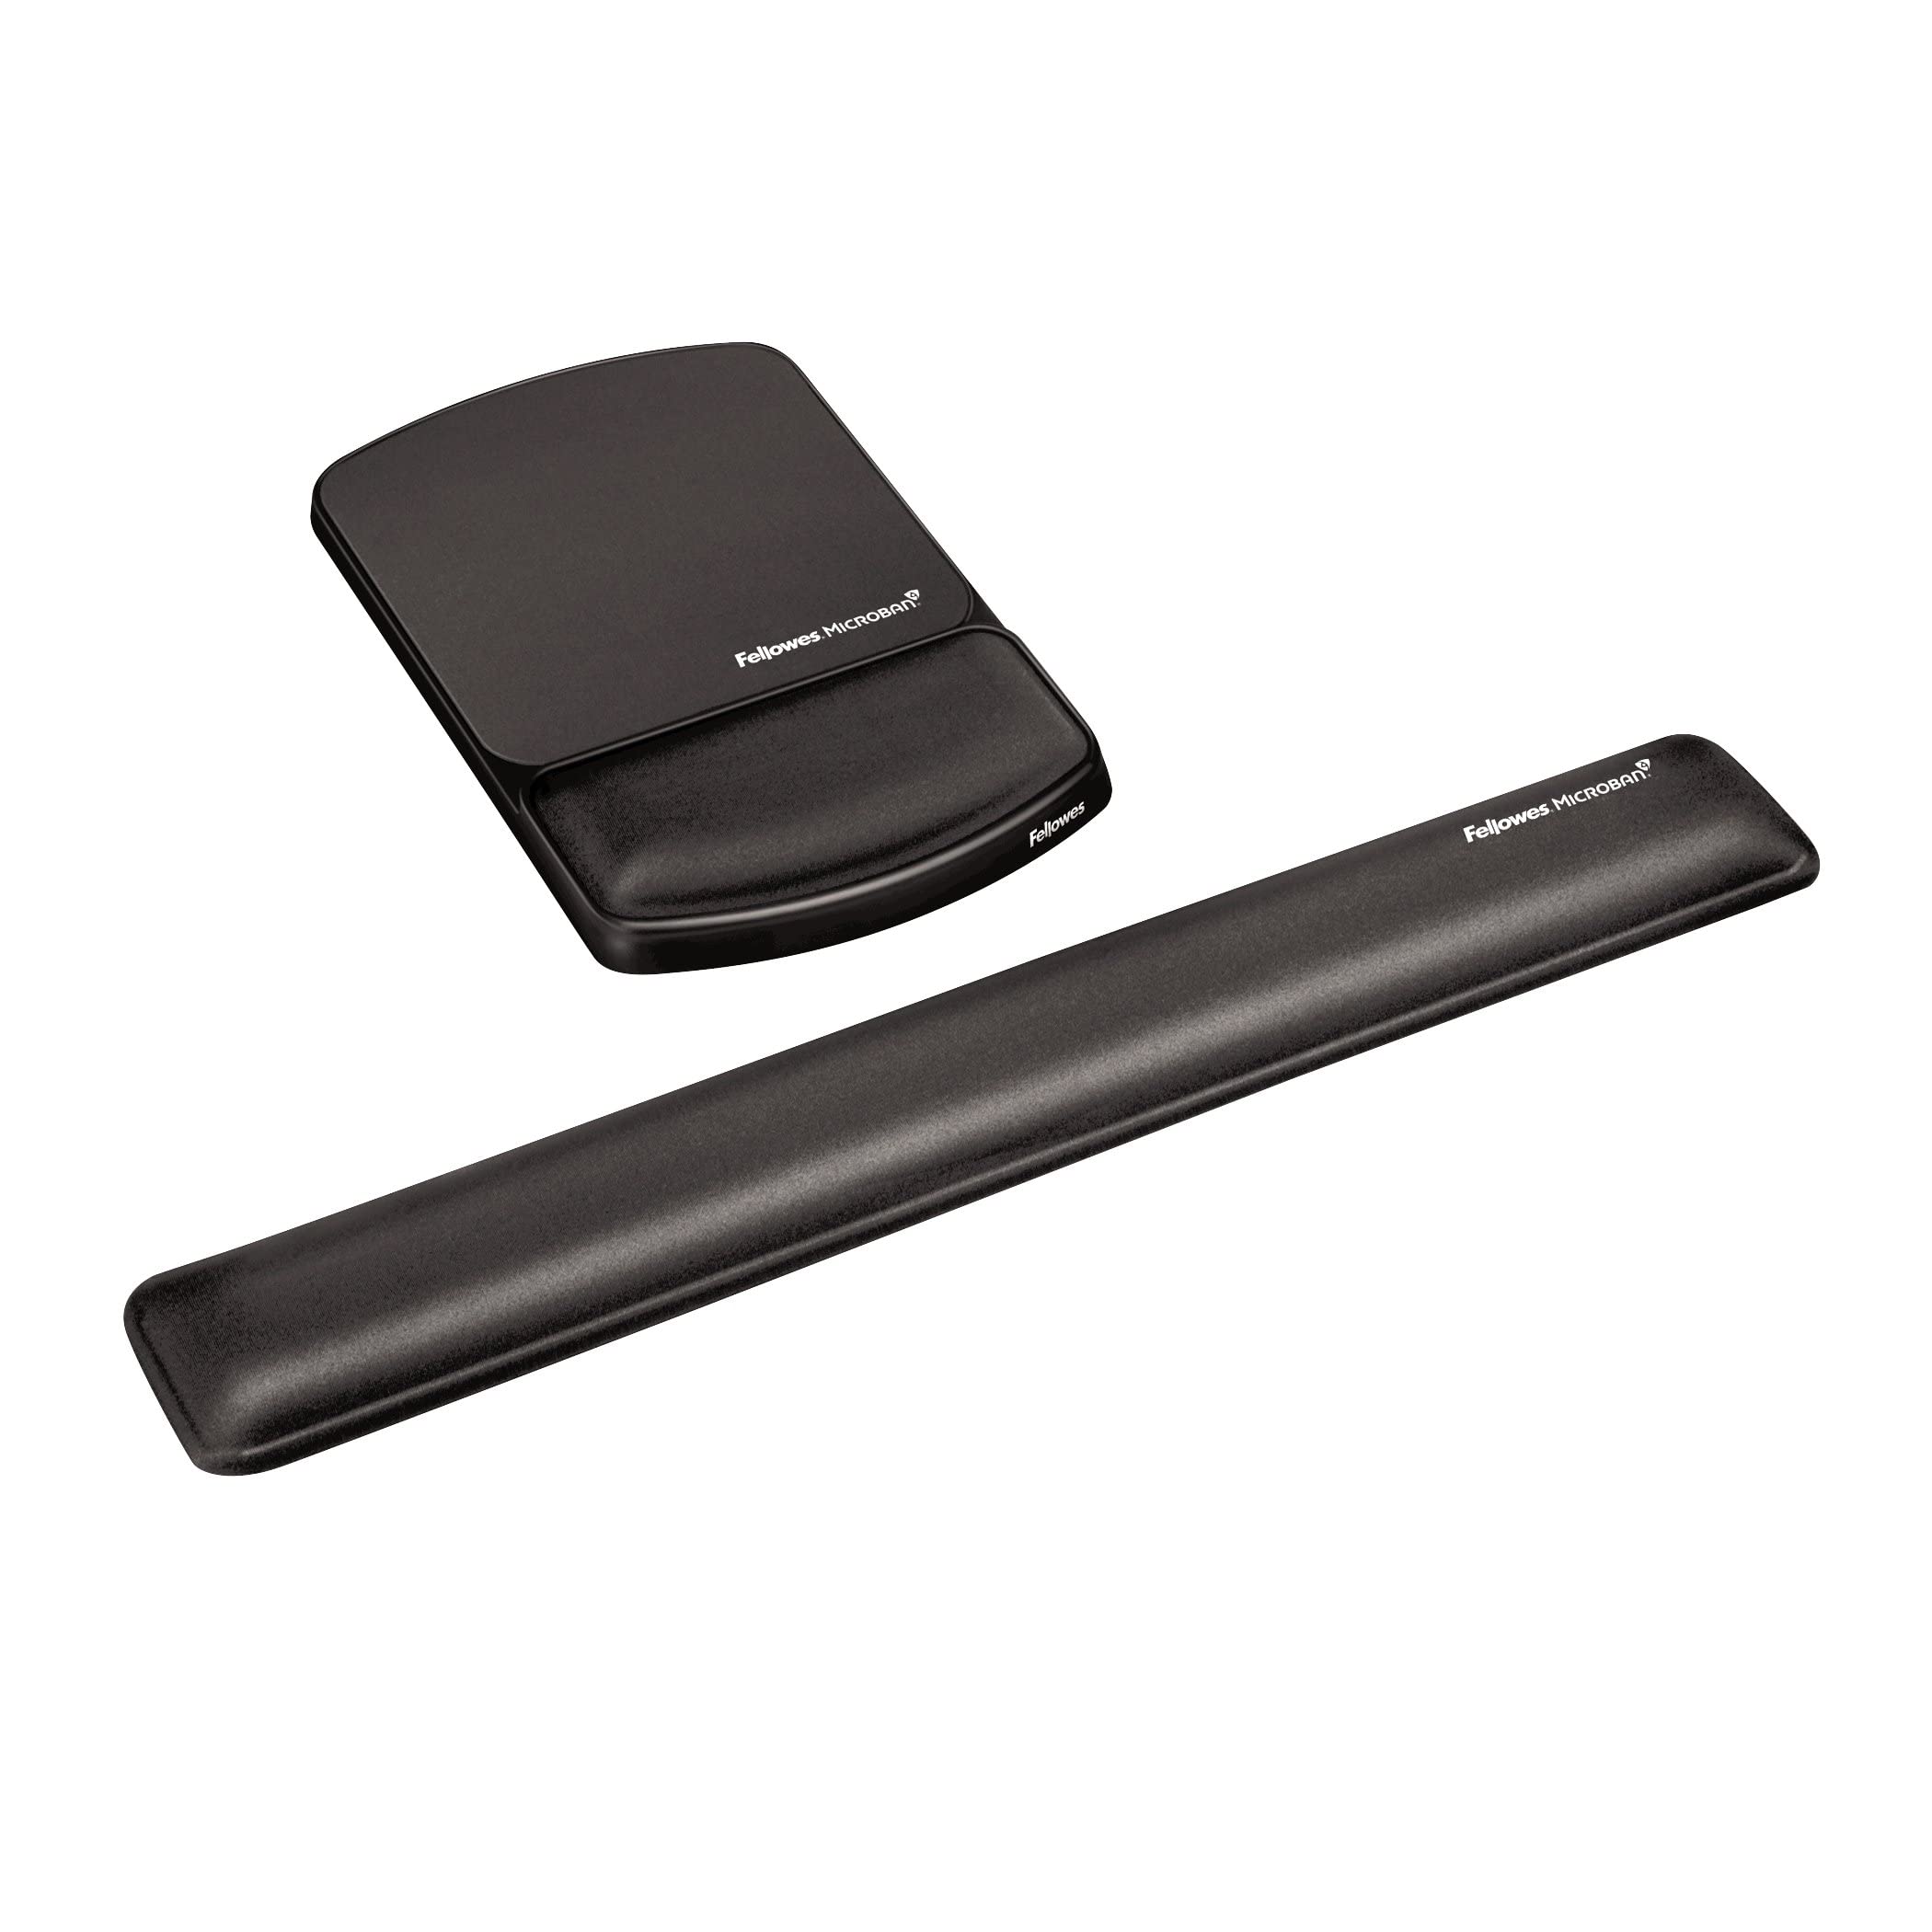 Fellowes Gel Wrist Rest and Mouse Pad with Microban Product Protection - Graphite, FW-9175101